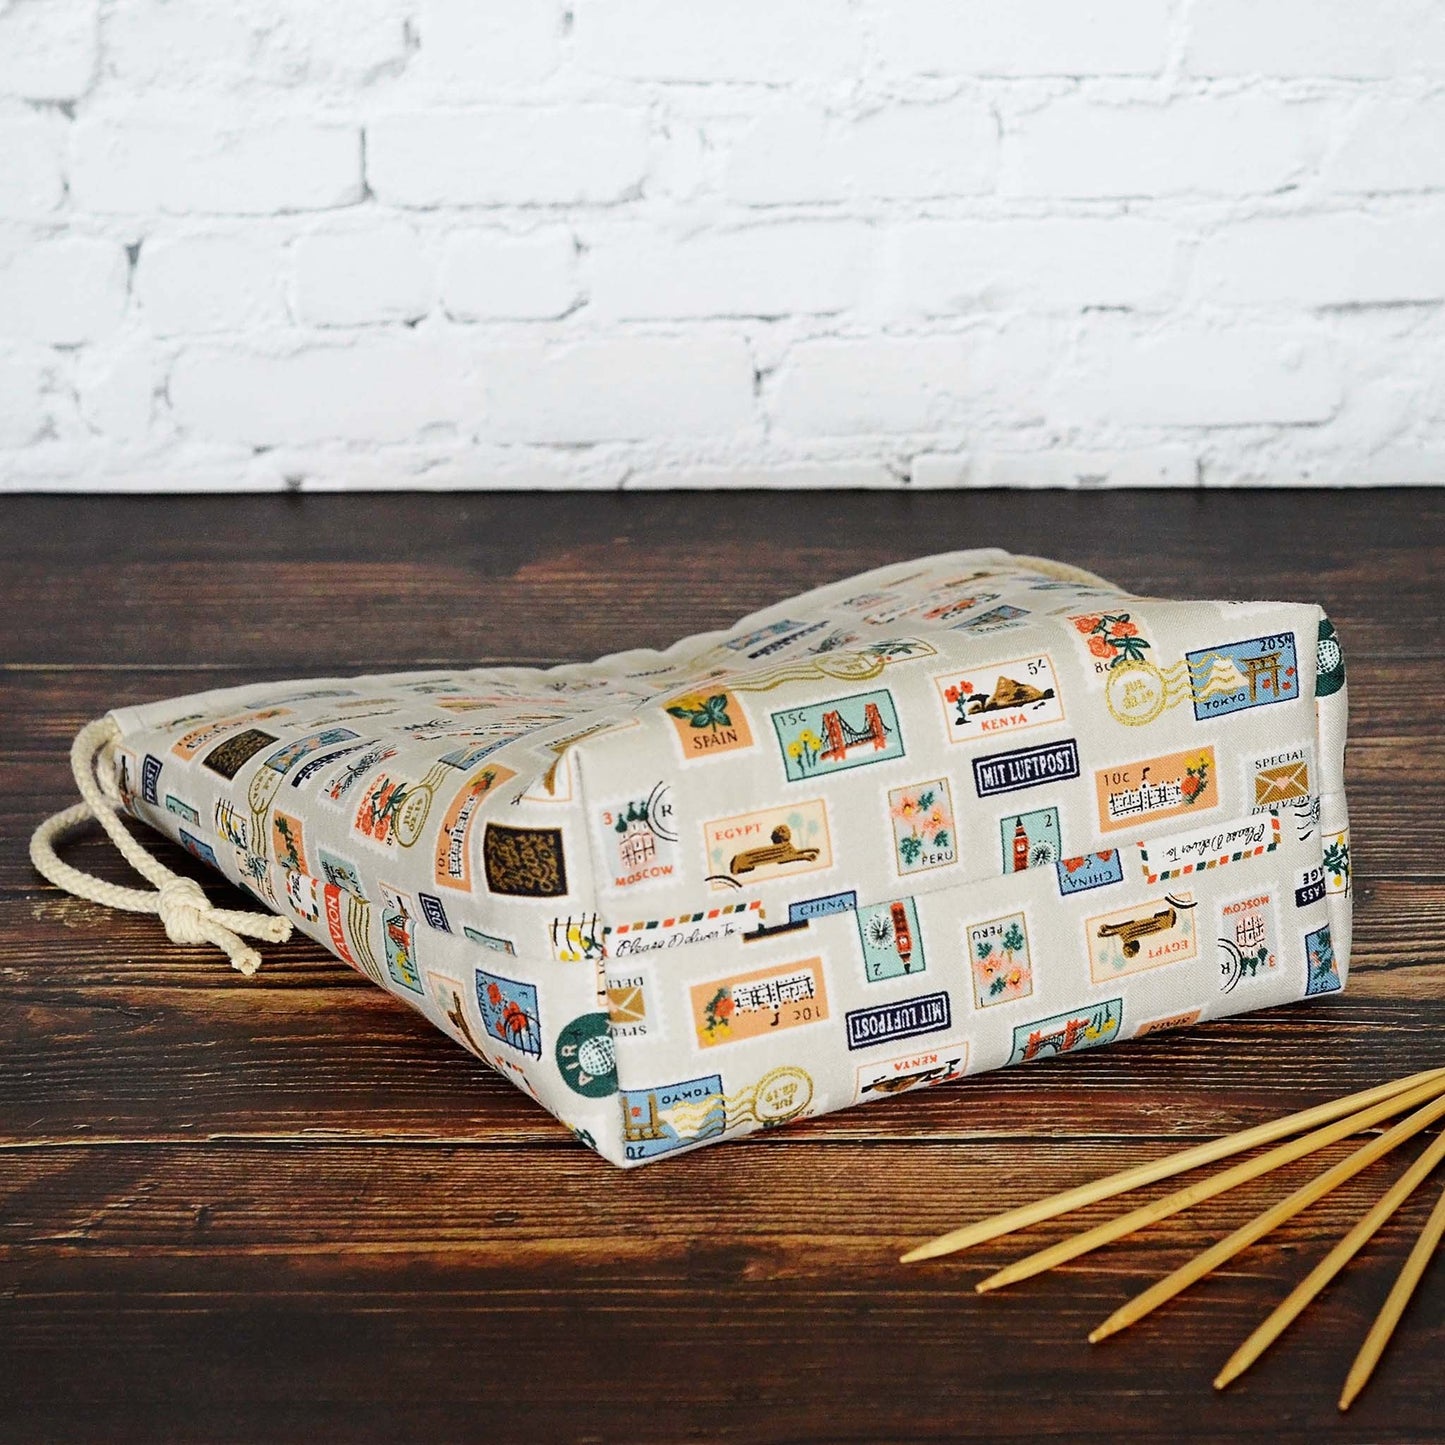 Postage Stamp patterned knitting project bag made from the Bon Voyage collection by Rifle Paper Co.  Made in Canada by Yellow Petal Handmade.